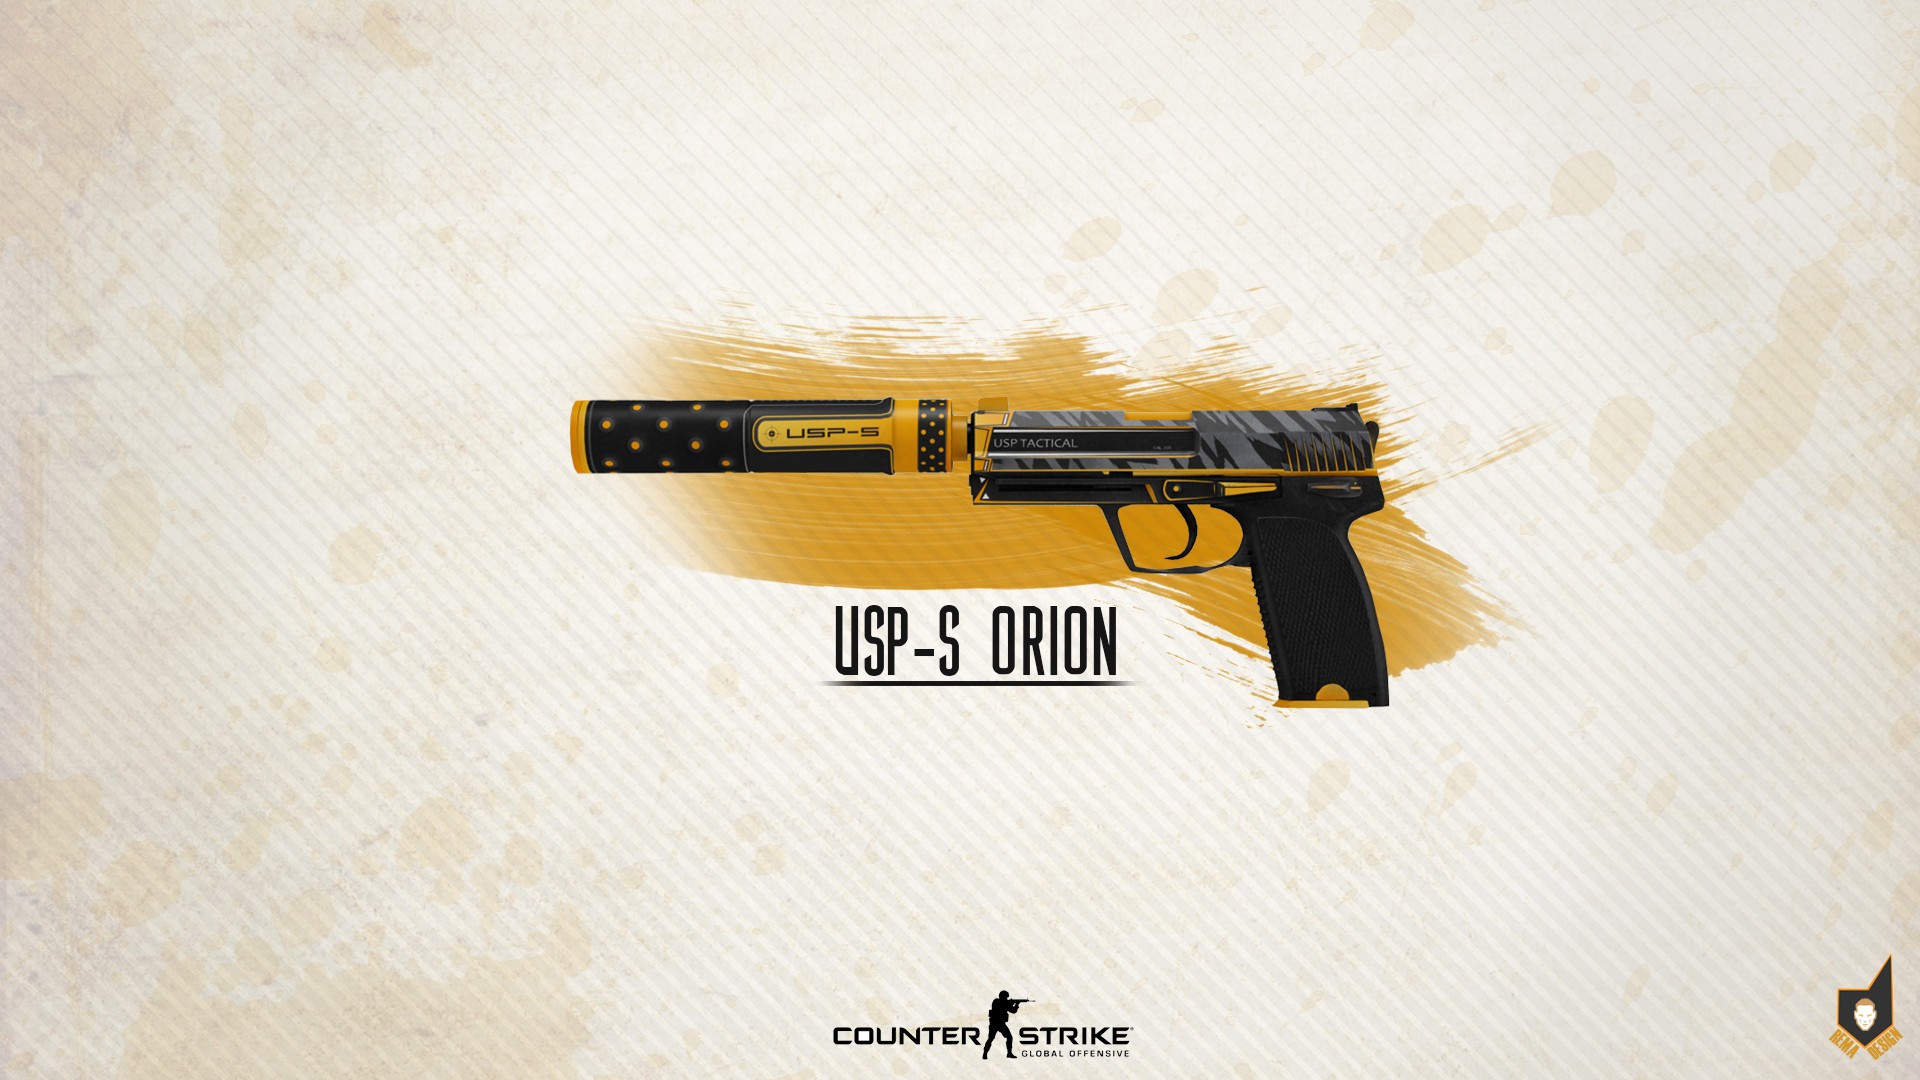 General 1920x1080 Counter-Strike Counter-Strike: Global Offensive PC gaming weapon pistol